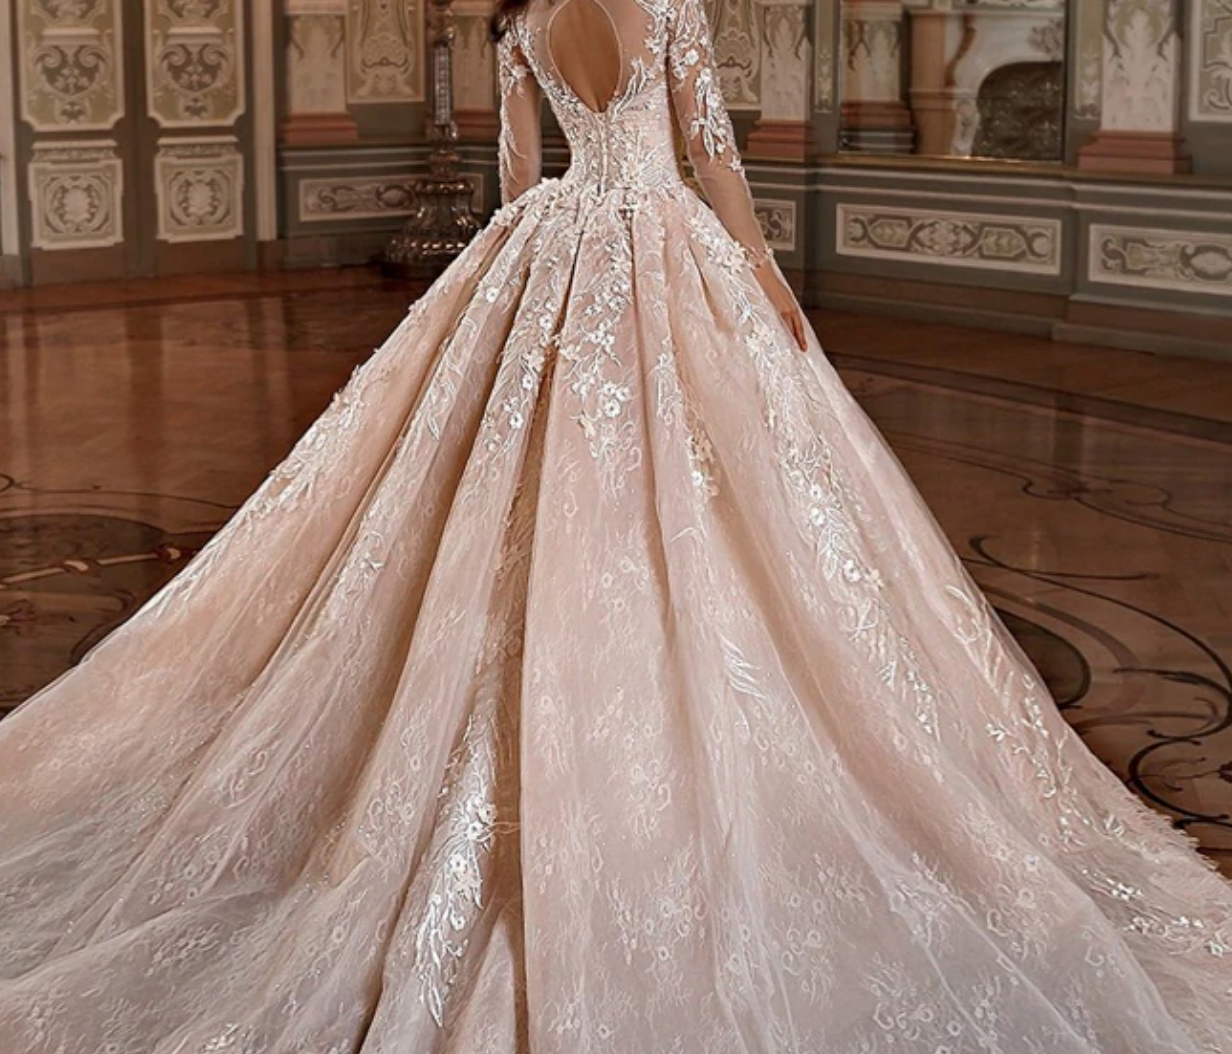 Illusion Long Sleeve Lace & Tulle Romantic Wedding Gown - Xdressy